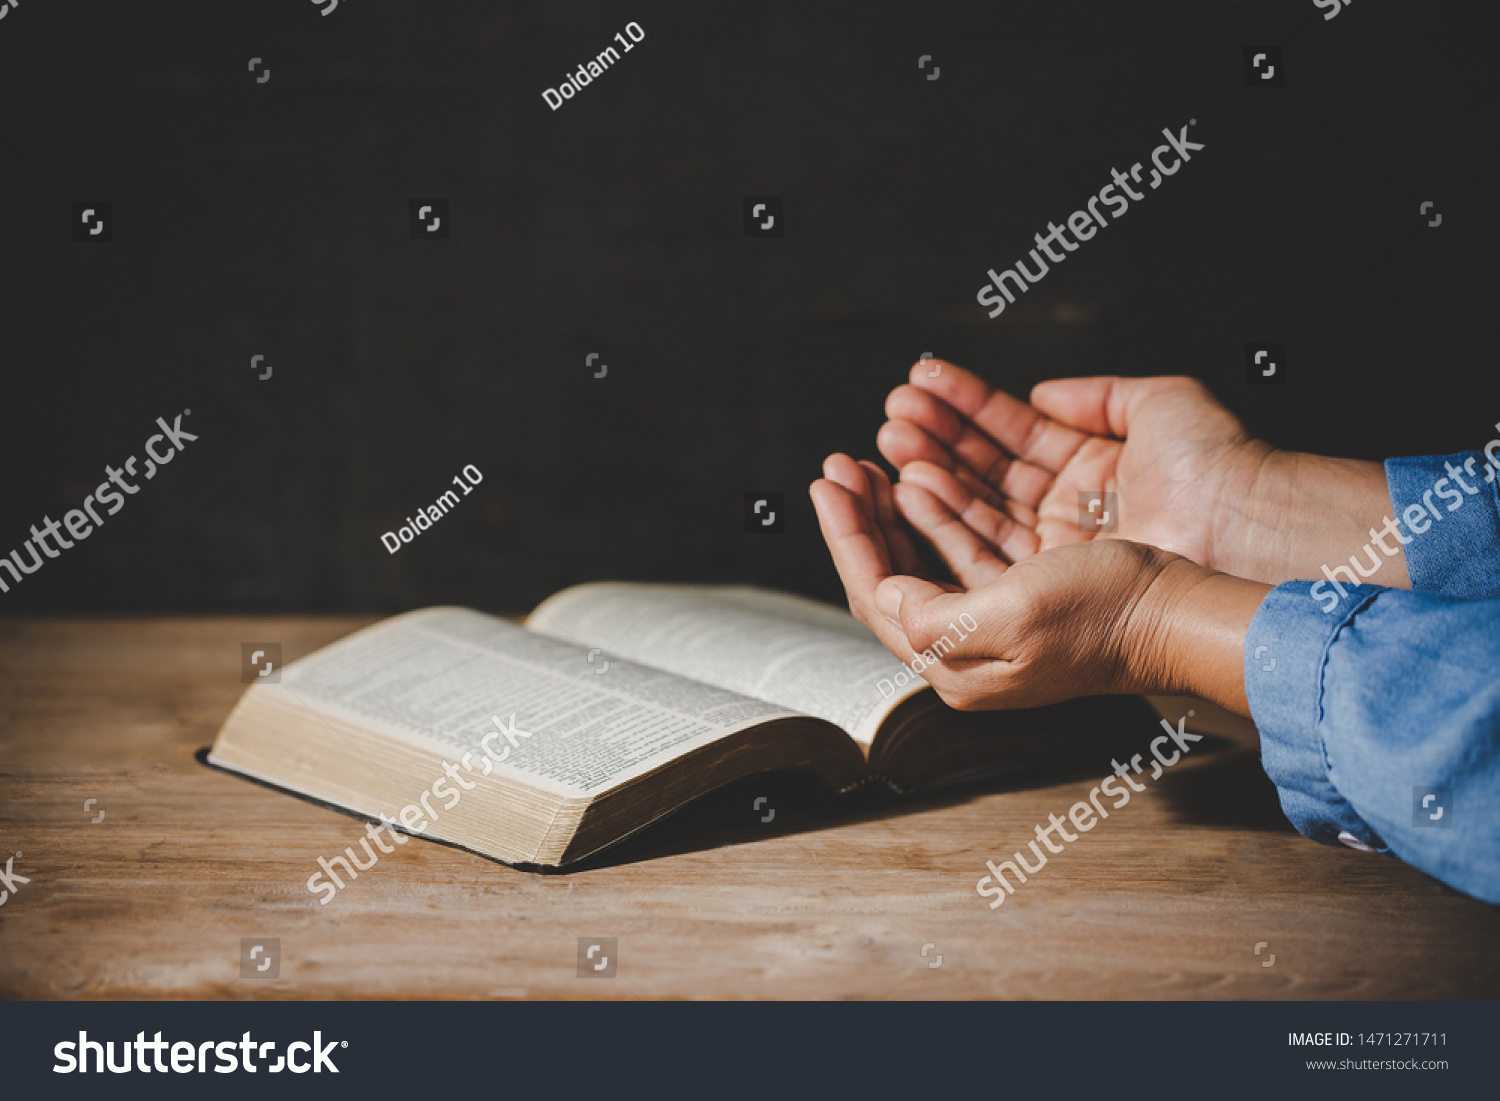 Spirituality and religion, Hands folded in prayer on a Holy Bible in church concept for faith. #1471271711